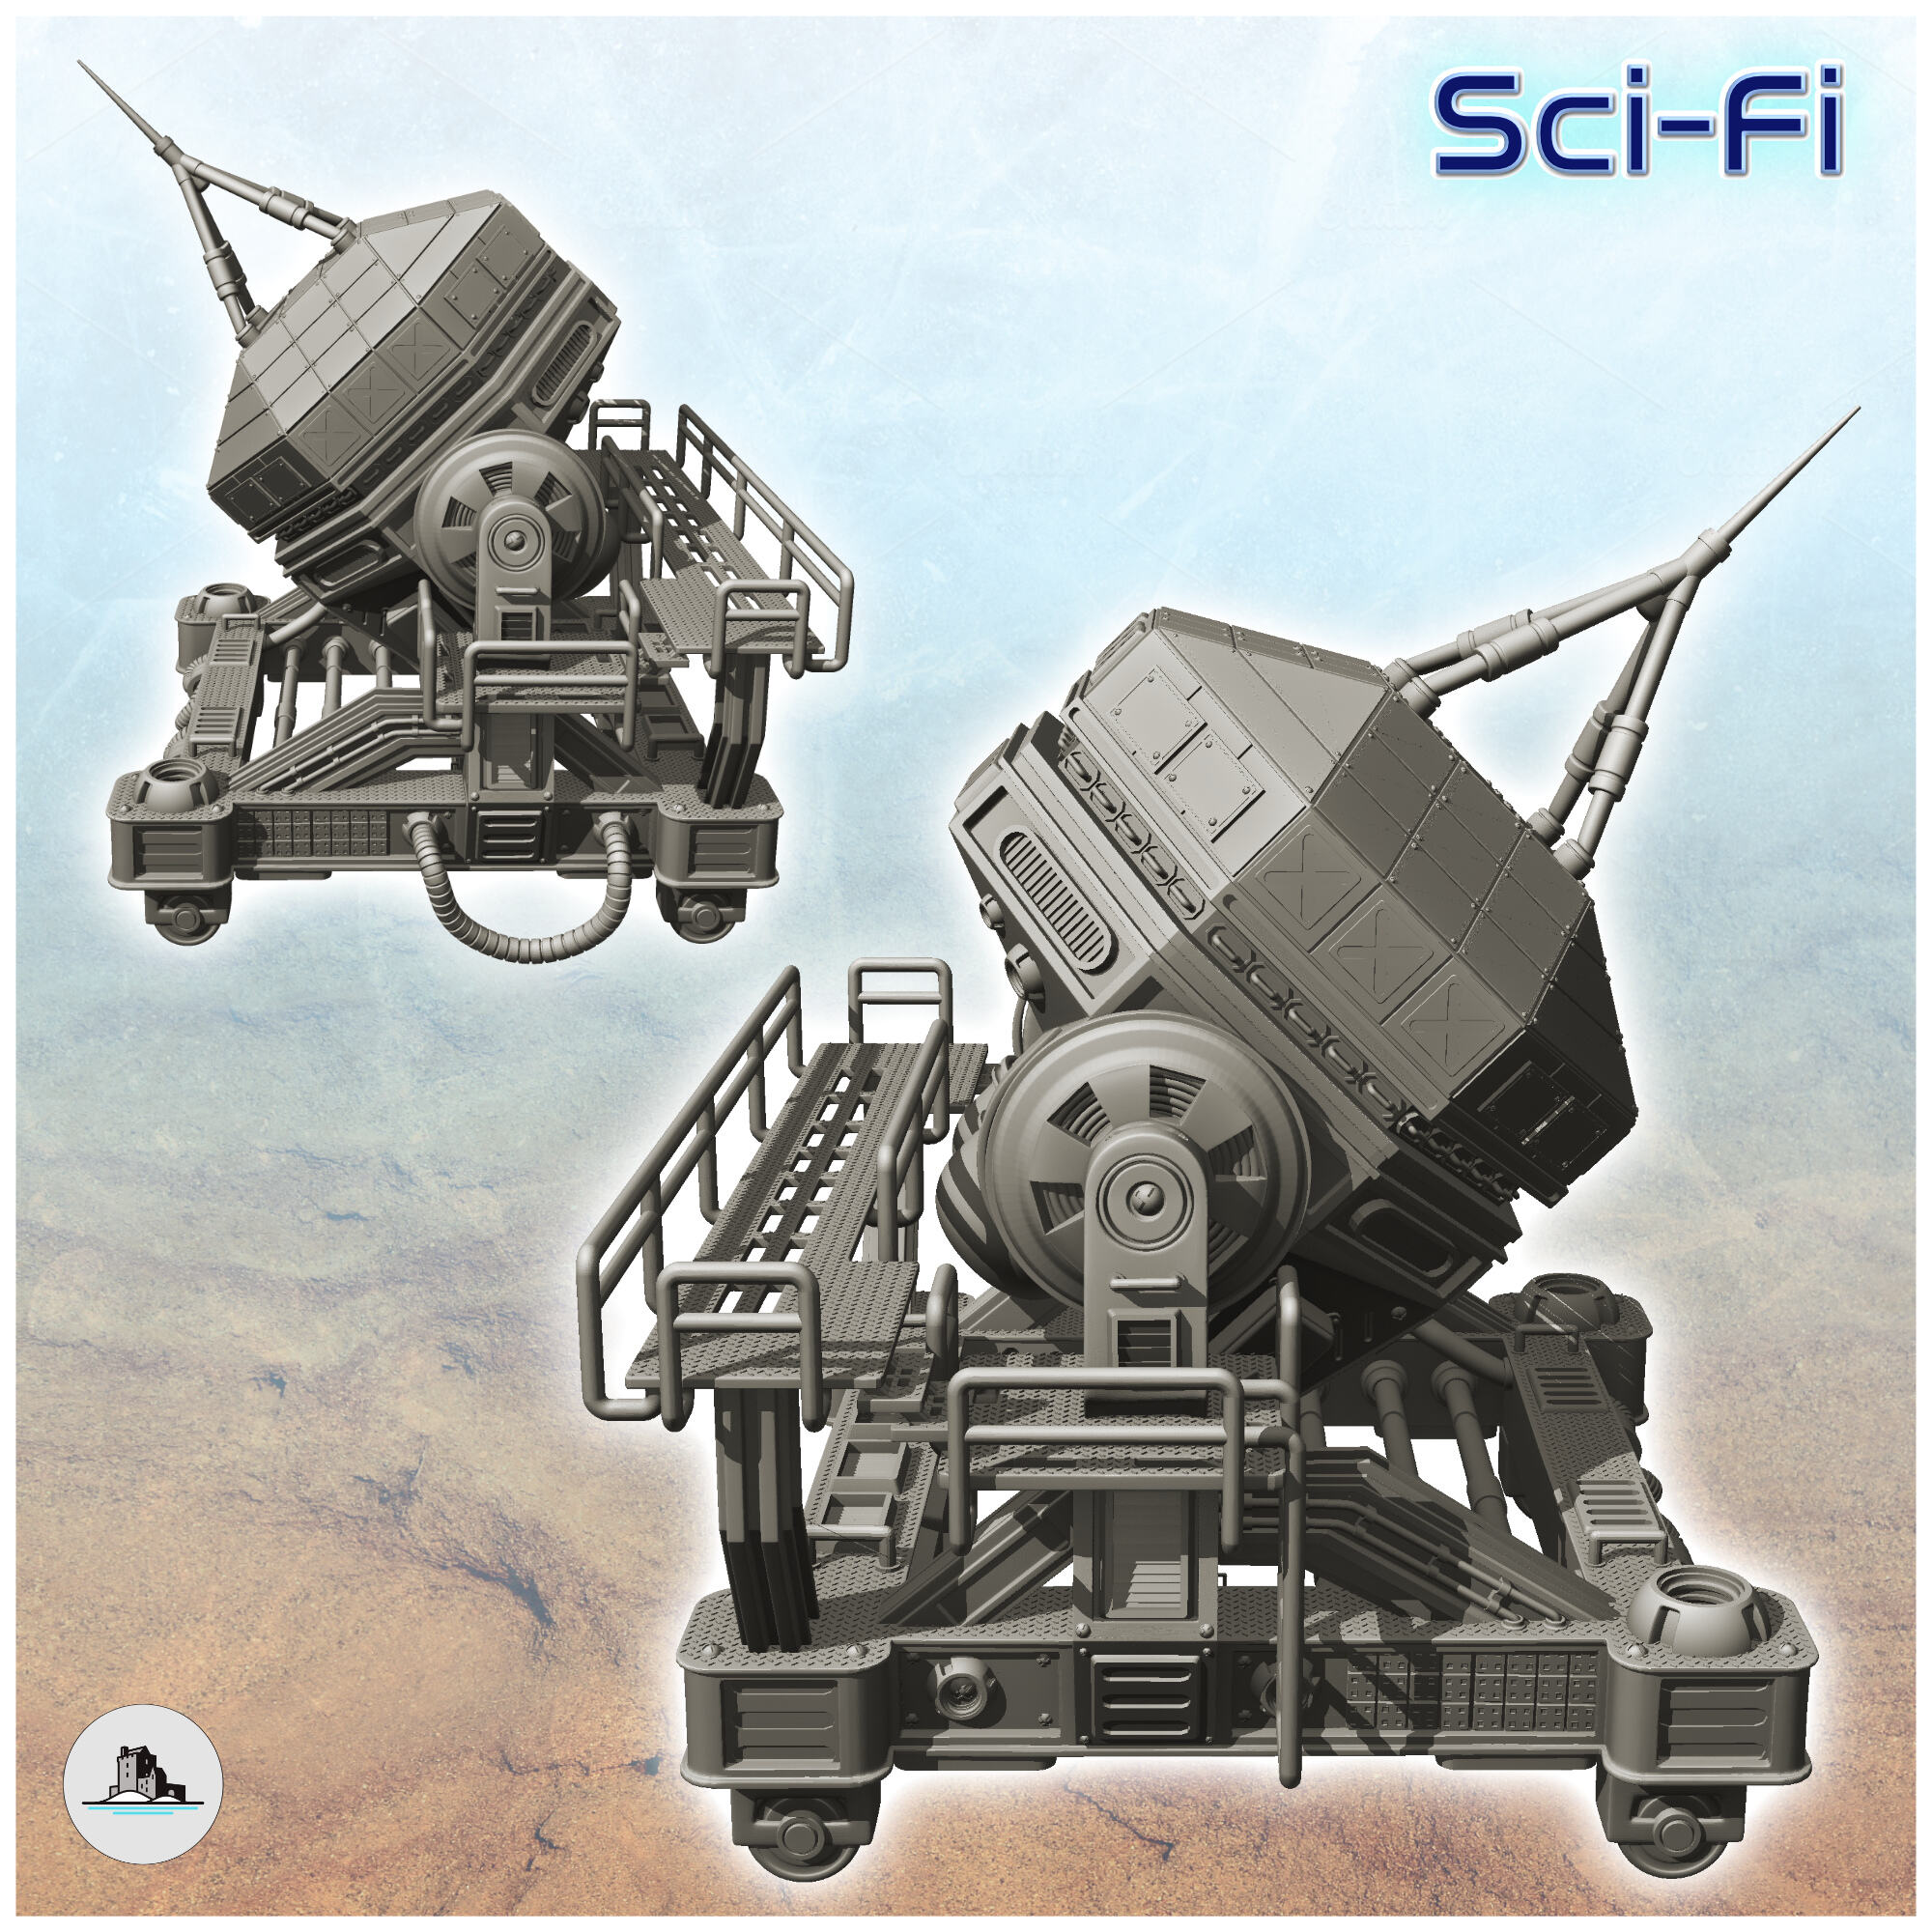 Large space antenna - Terrain Scifi Science fiction SF